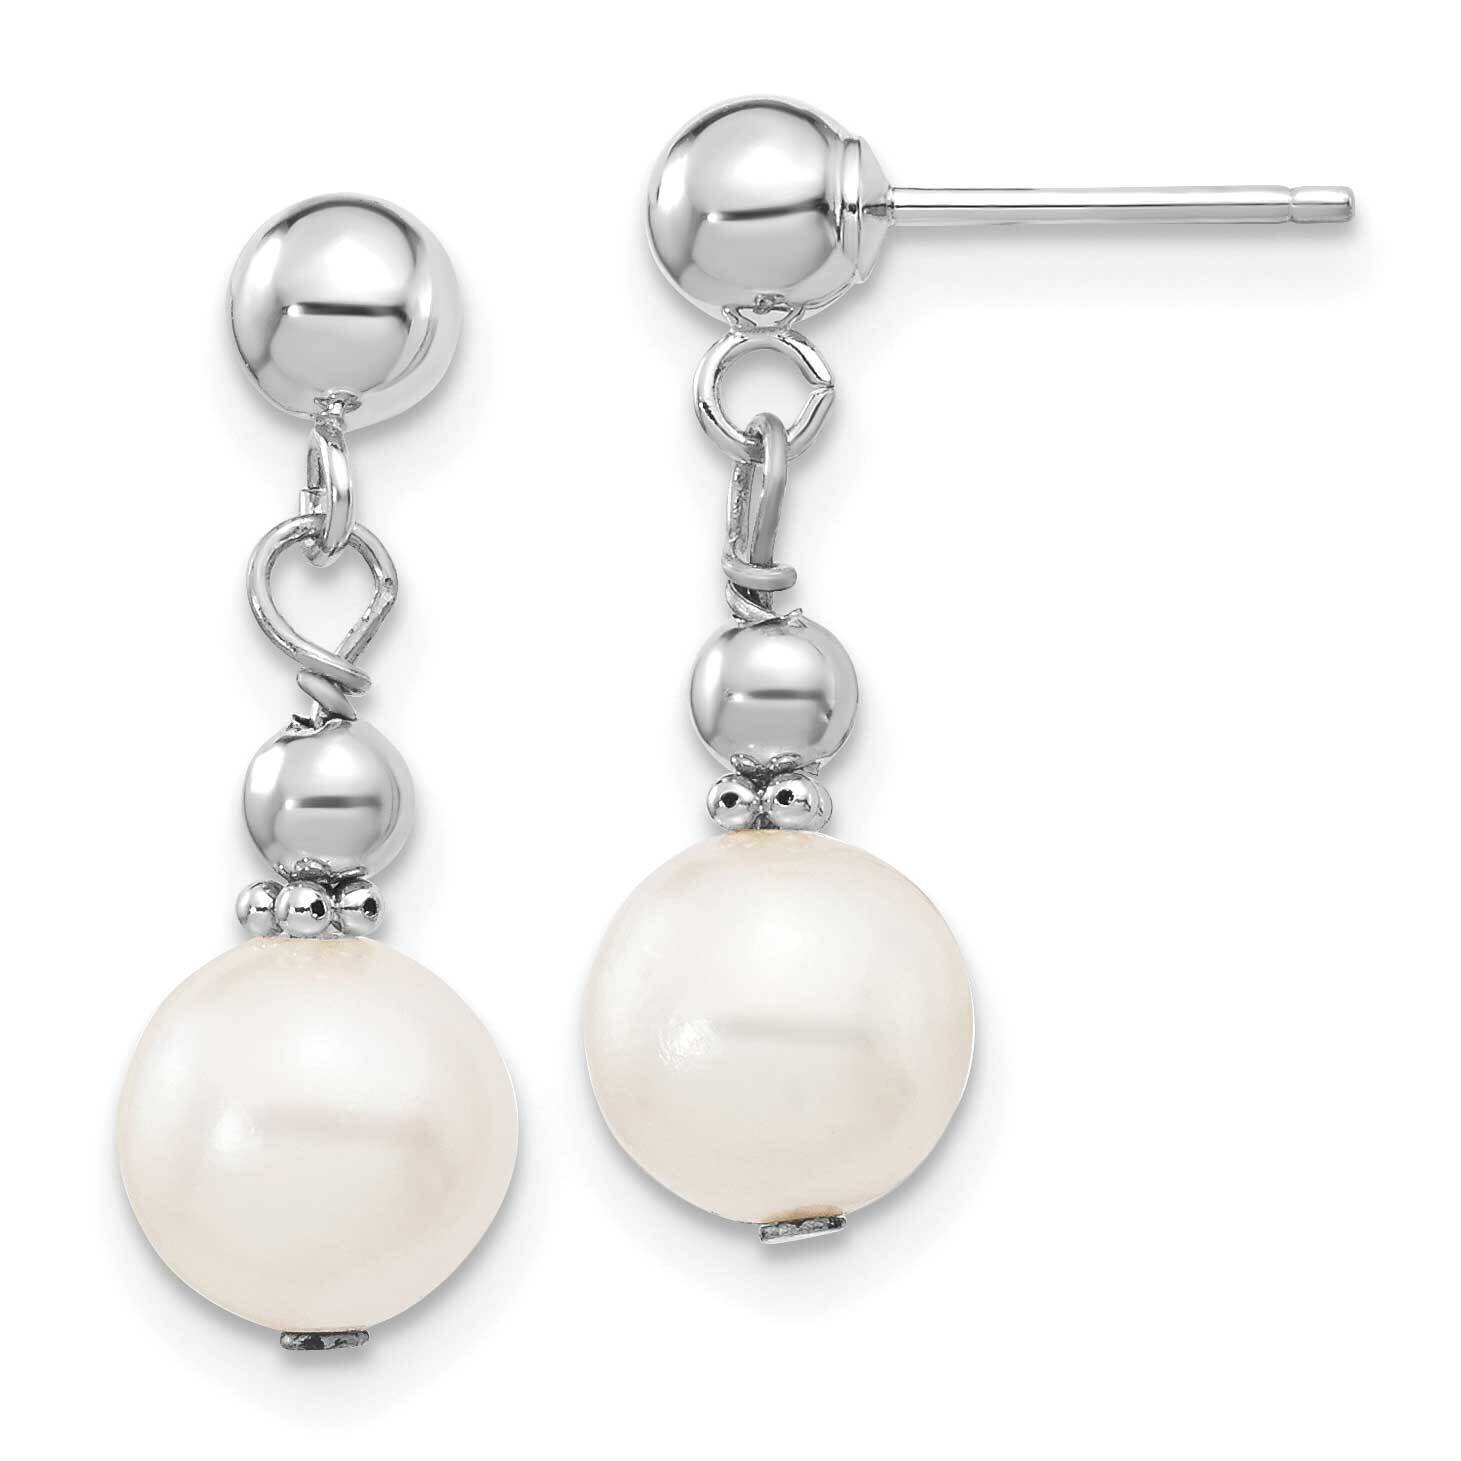 7-8mm White Semi-Round Freshwater Cultured Pearl Dangle Post Earrings 14k White Gold XFW564